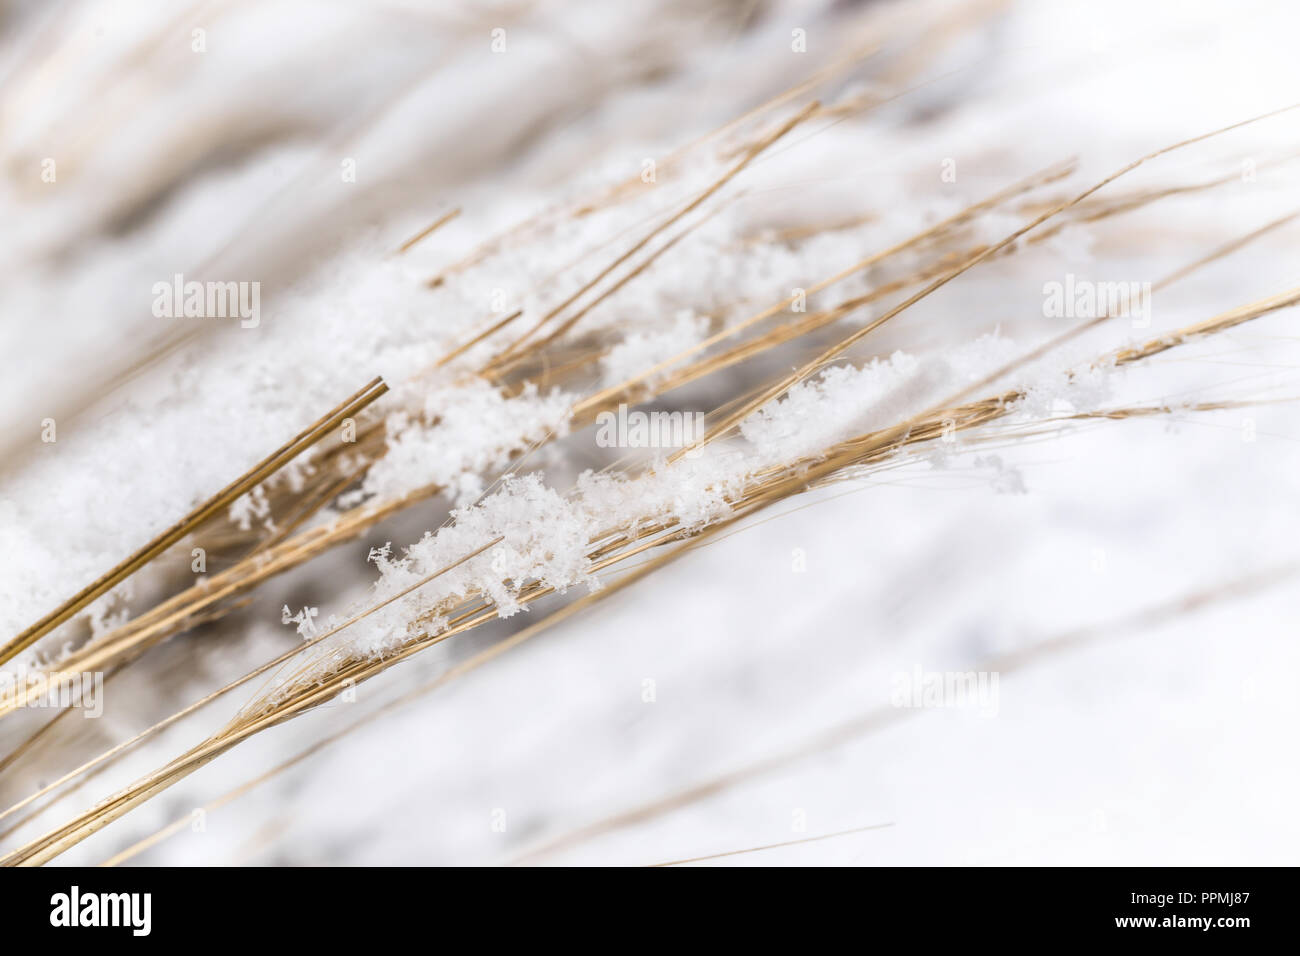 Detail of snowflakes on weed. Nature in winter, macrophotography. Stock Photo